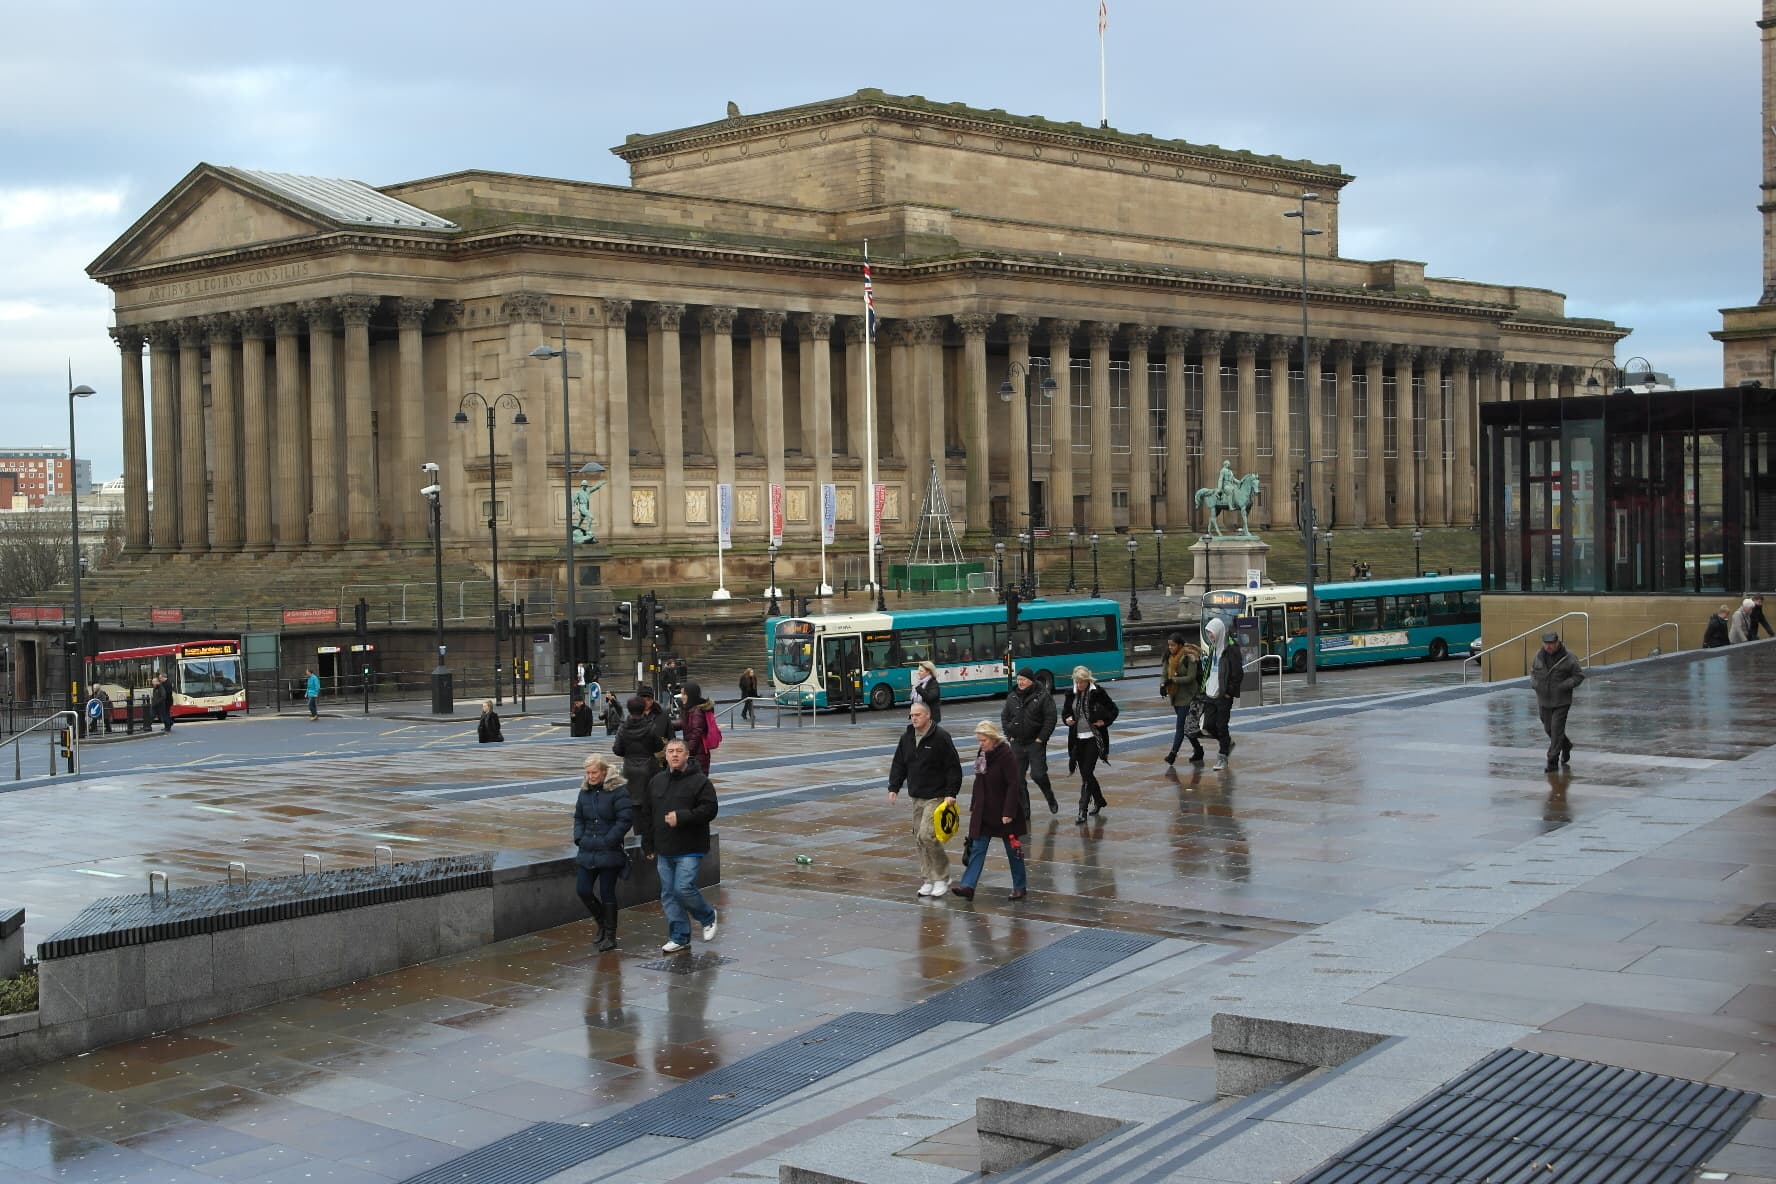 St George's Hall in Liverpool